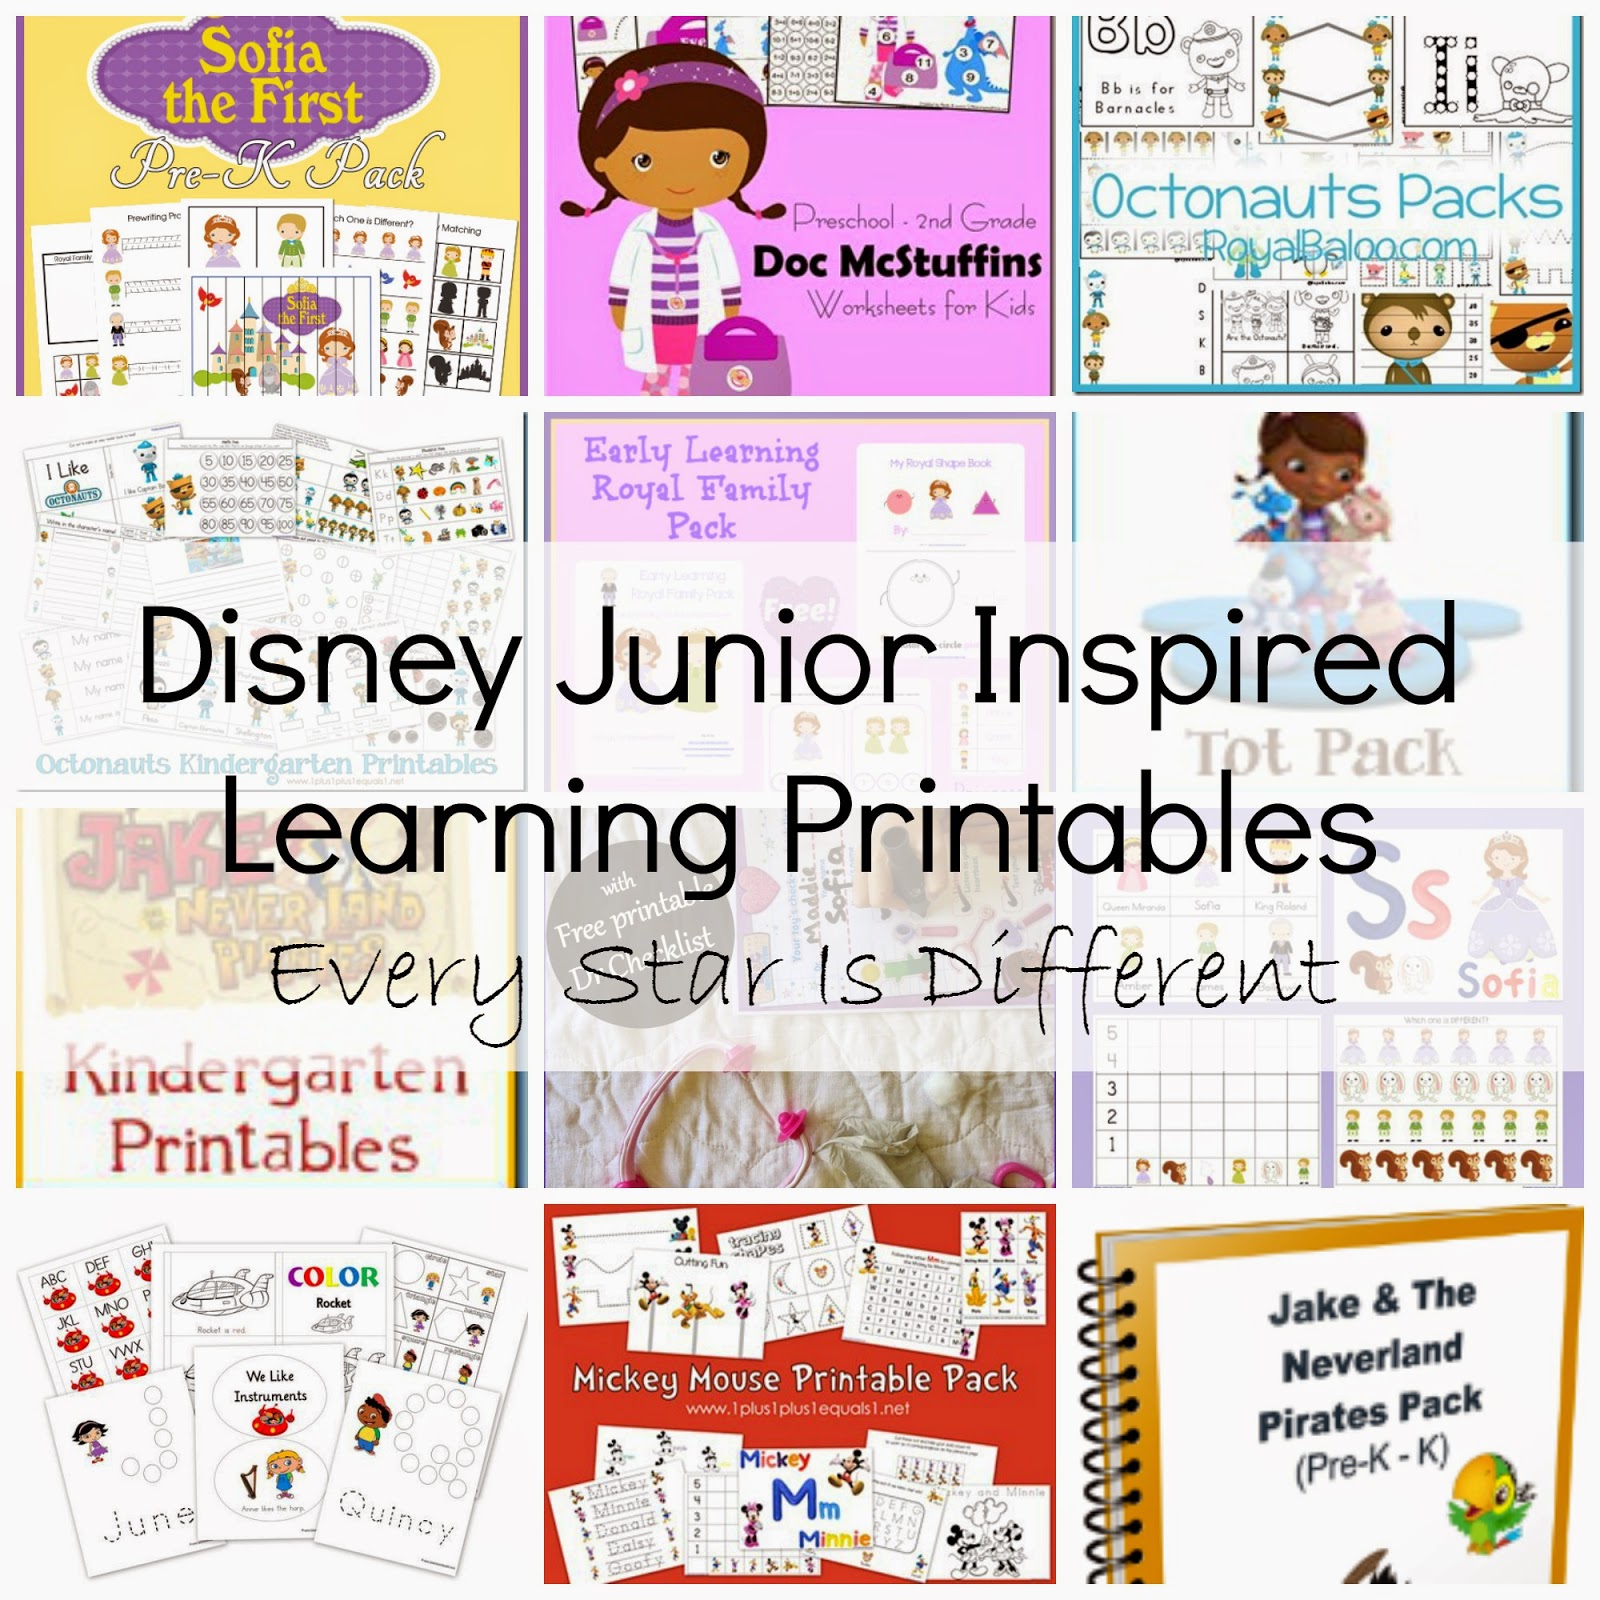 free-disney-inspired-learning-printable-packs-activities-every-star-is-different